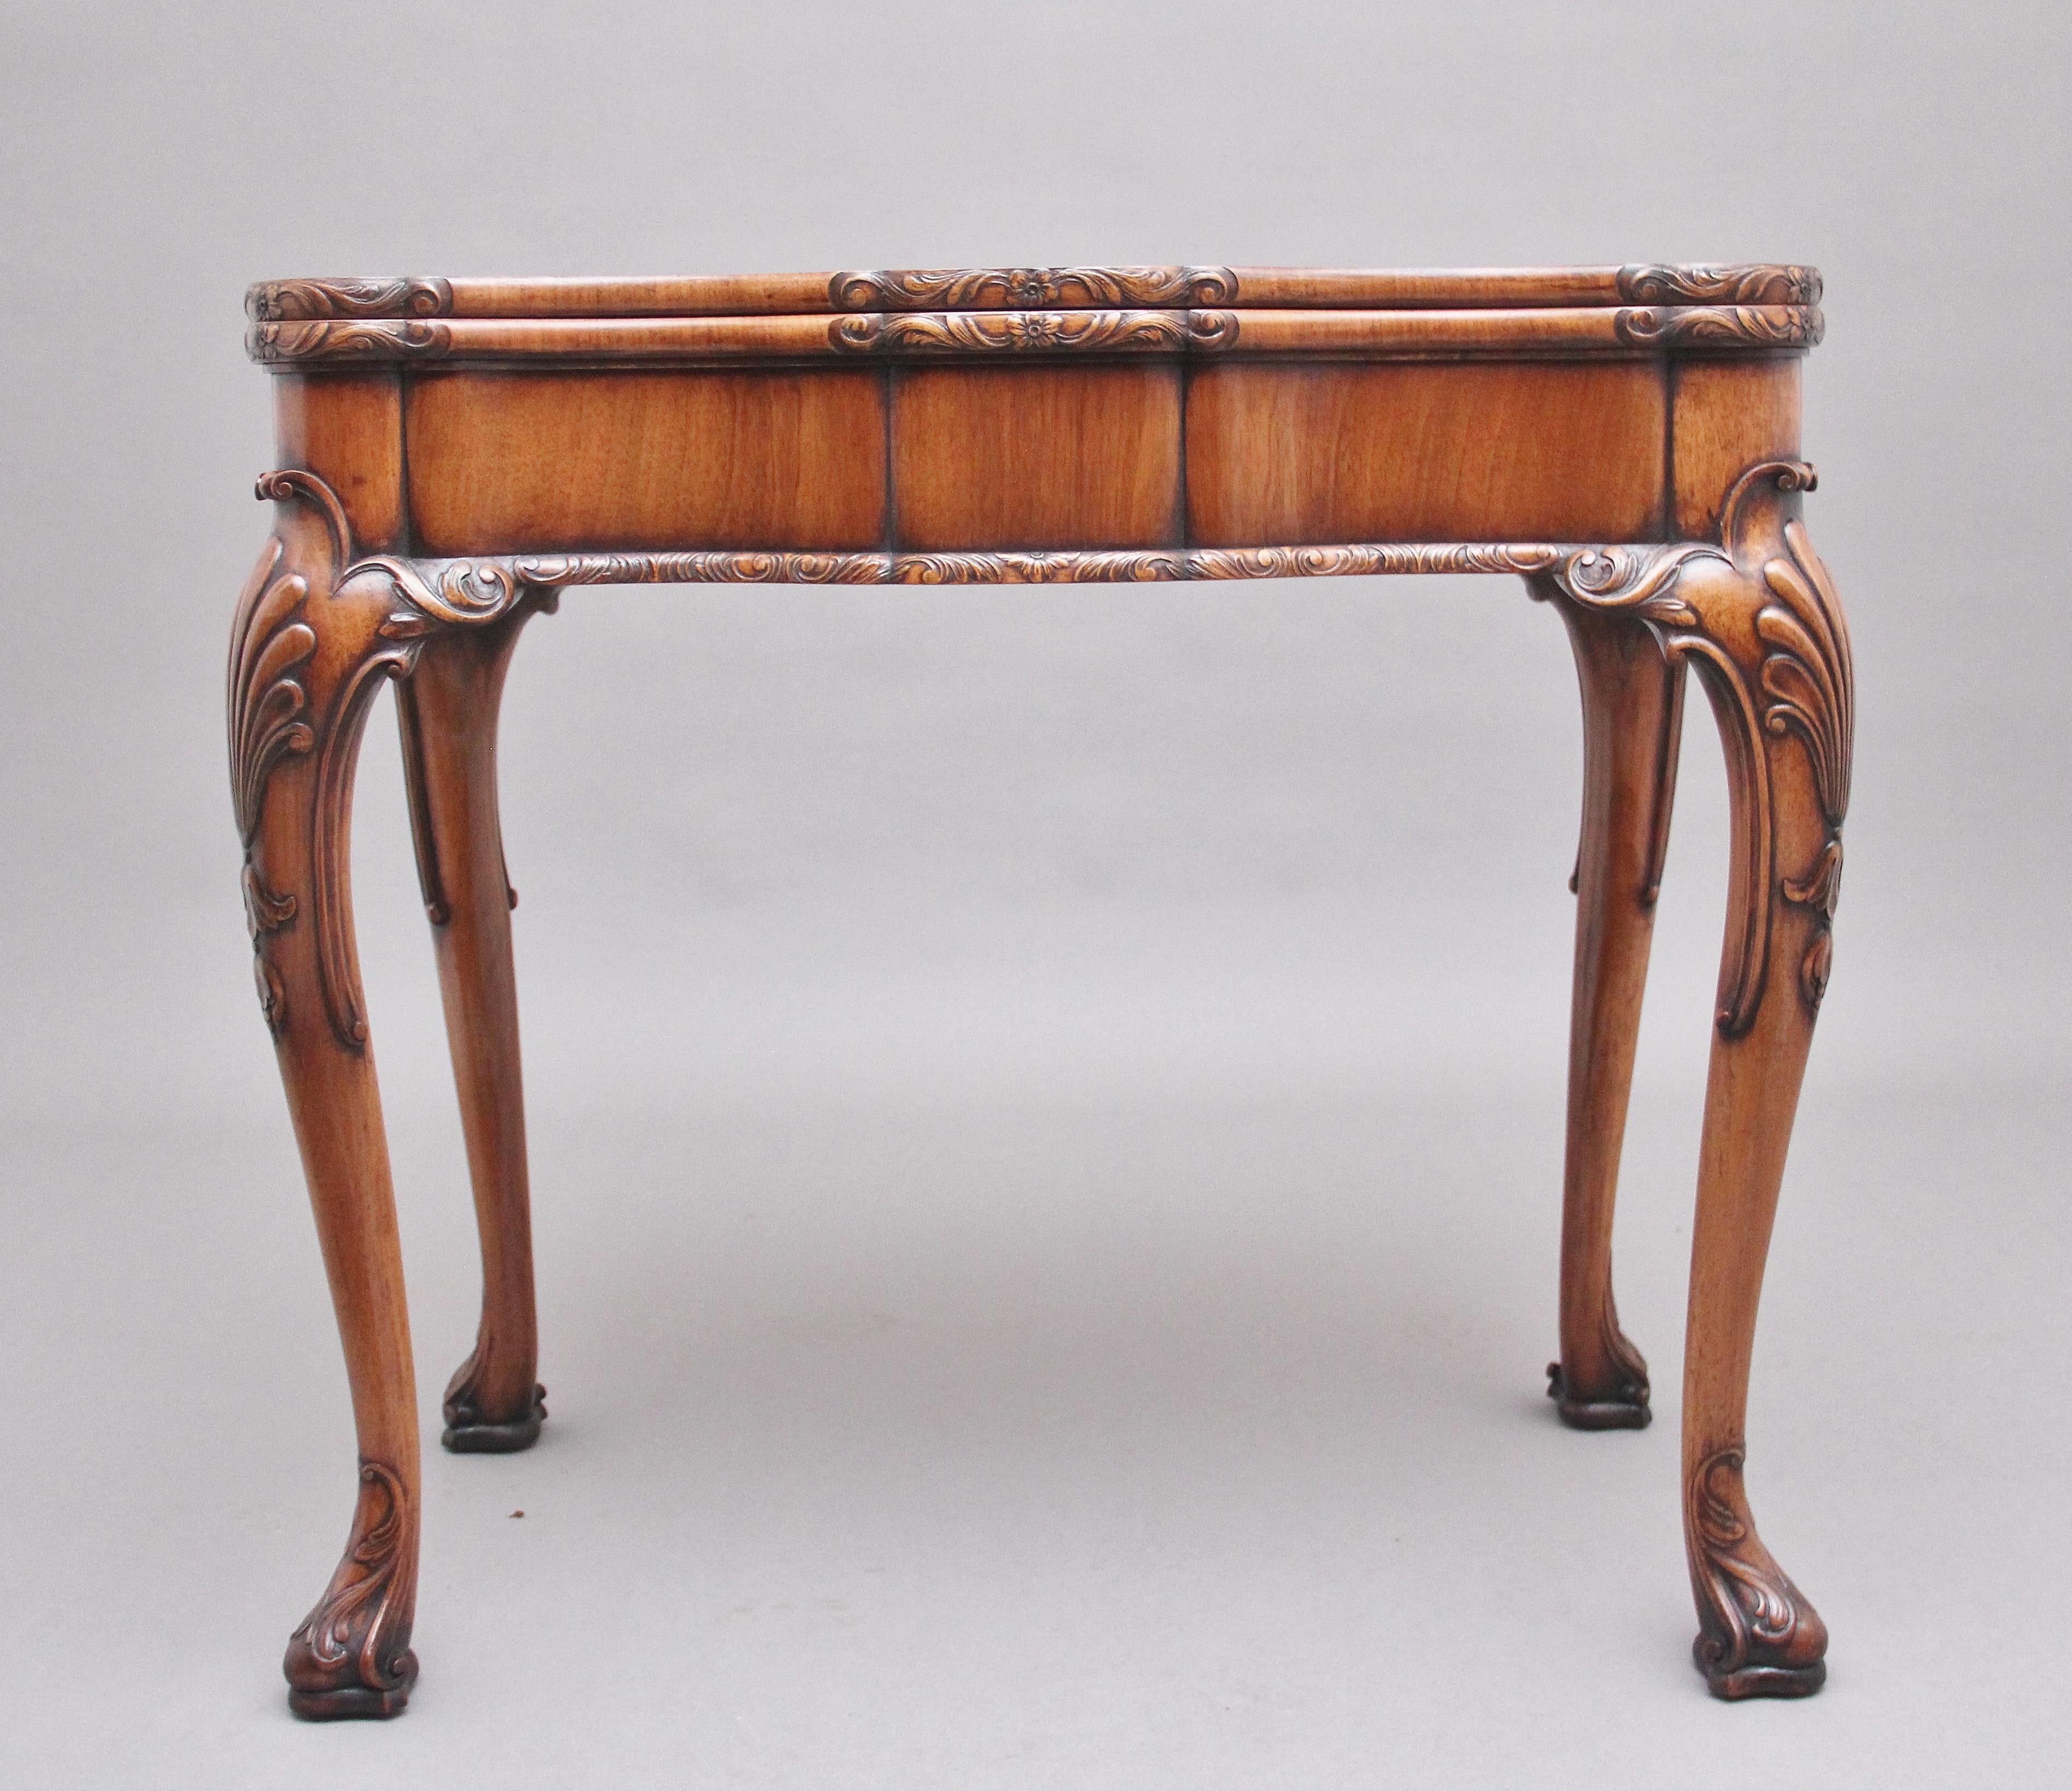 A superb quality early 20th century walnut card table, the shaped hinged fold over top having a lovely figuration with carved floral decoration on the edge, folding over to reveal green baize playing surface, having a deep frieze below with further